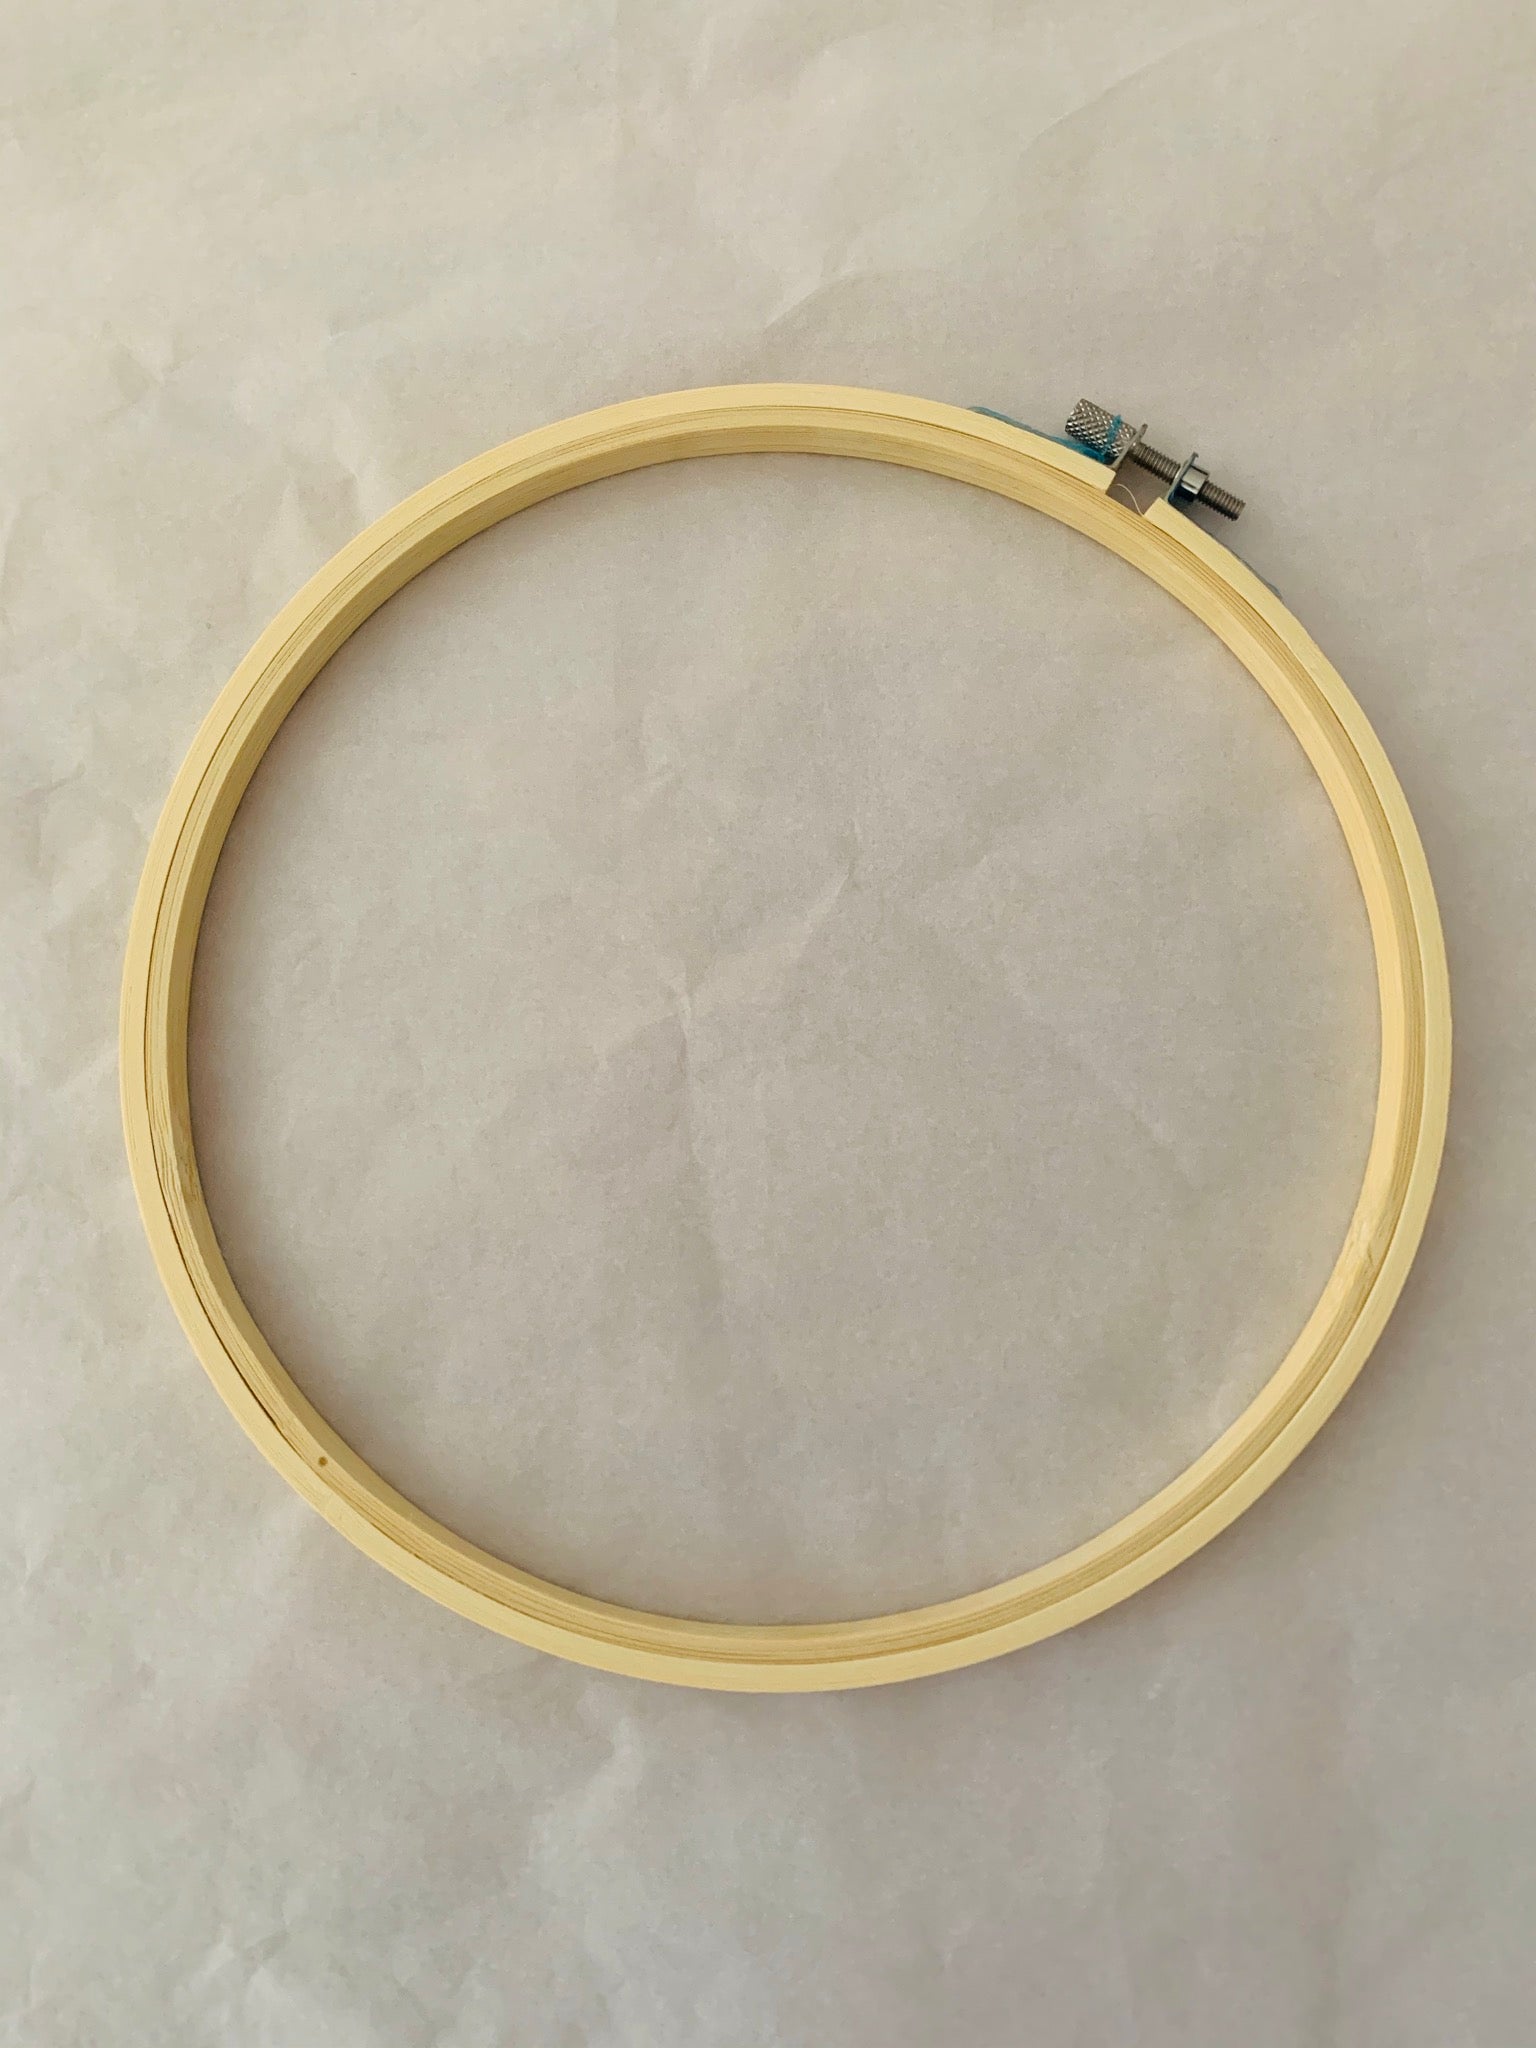 XXL Large bamboo embroidery hoop 14”